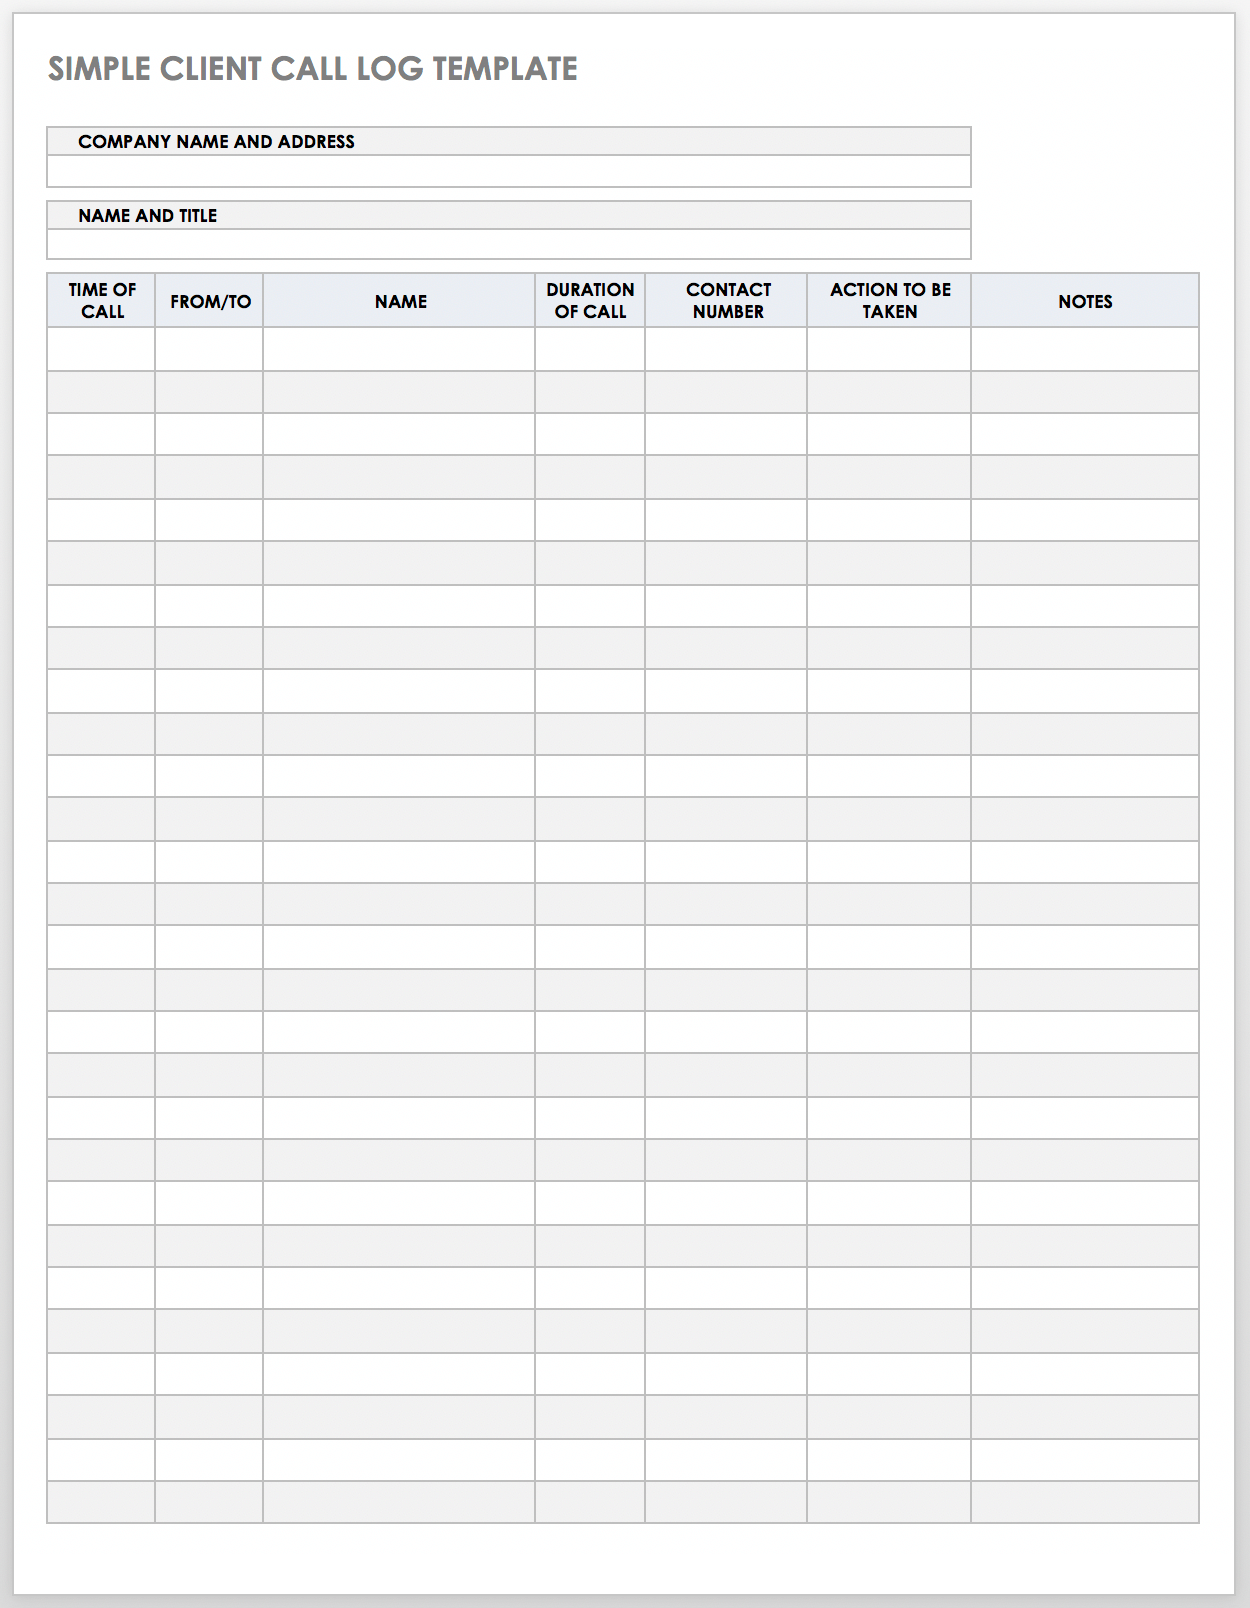 Sign Out Sheet Template Word from www.smartsheet.com